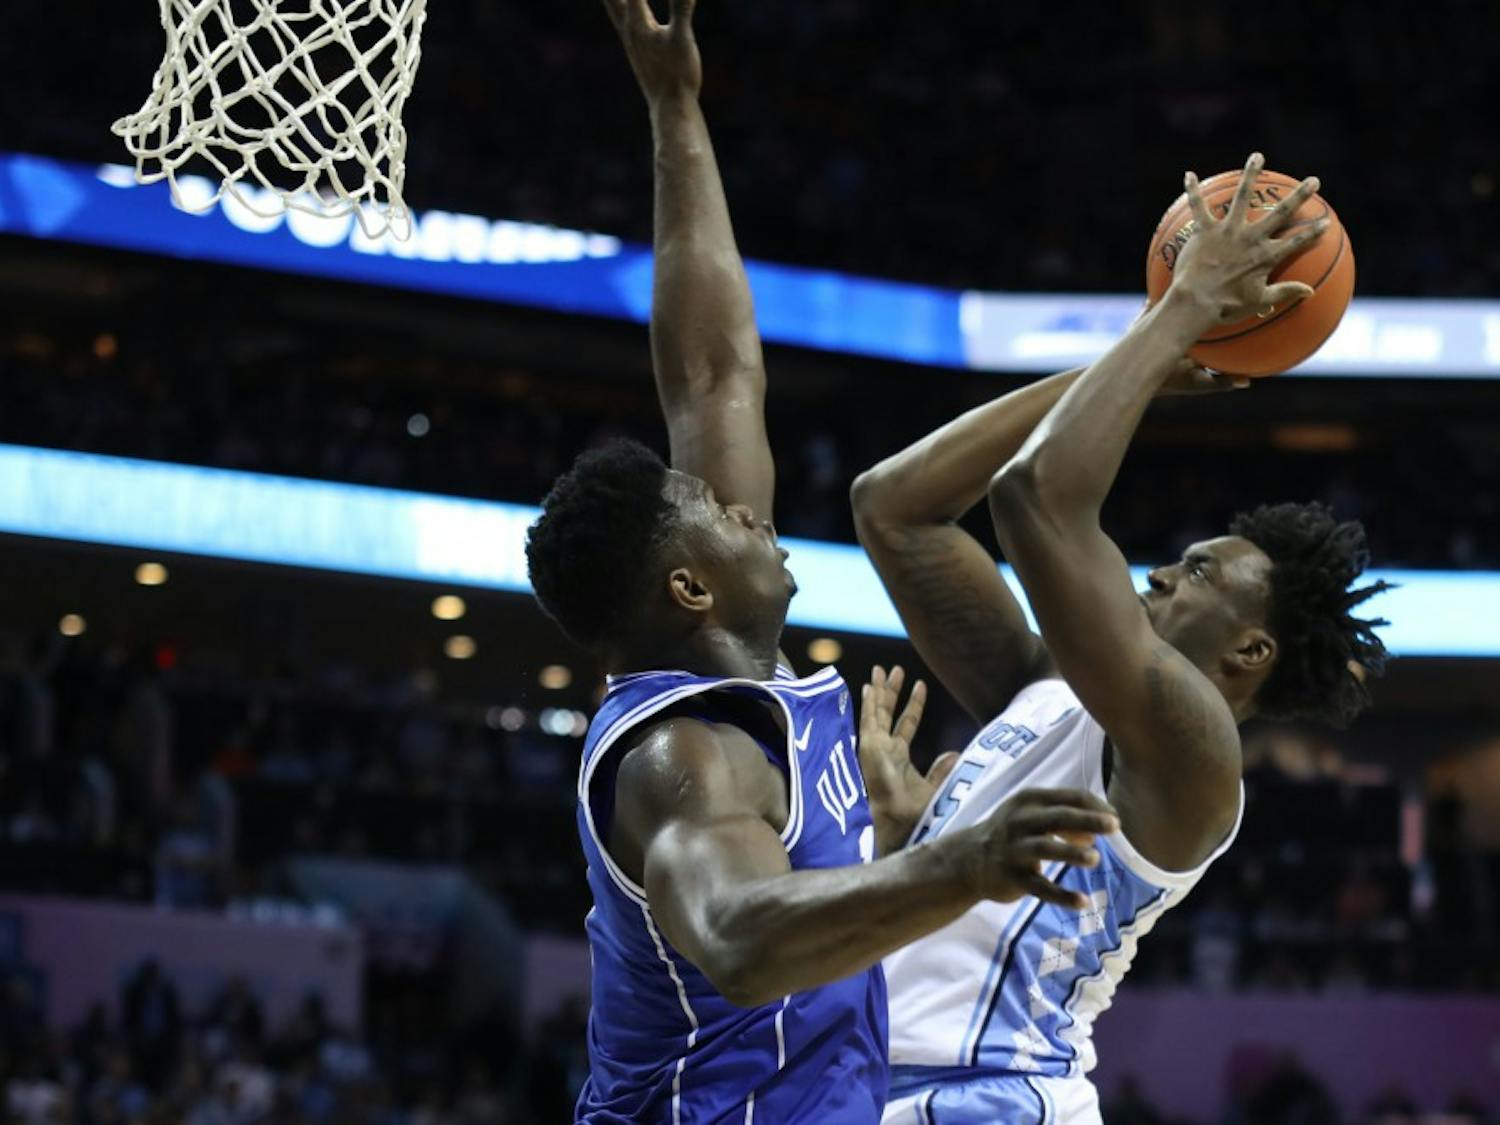 Duke first-year forward Zion Williamson (1) attempts to block a layup by UNC first-year forward Nassir Little (5) during the semifinals of the ACC Tournament at the Spectrum Center in Charlotte, N.C. on Friday, March 15, 2019. UNC fell to Duke 73-74. 